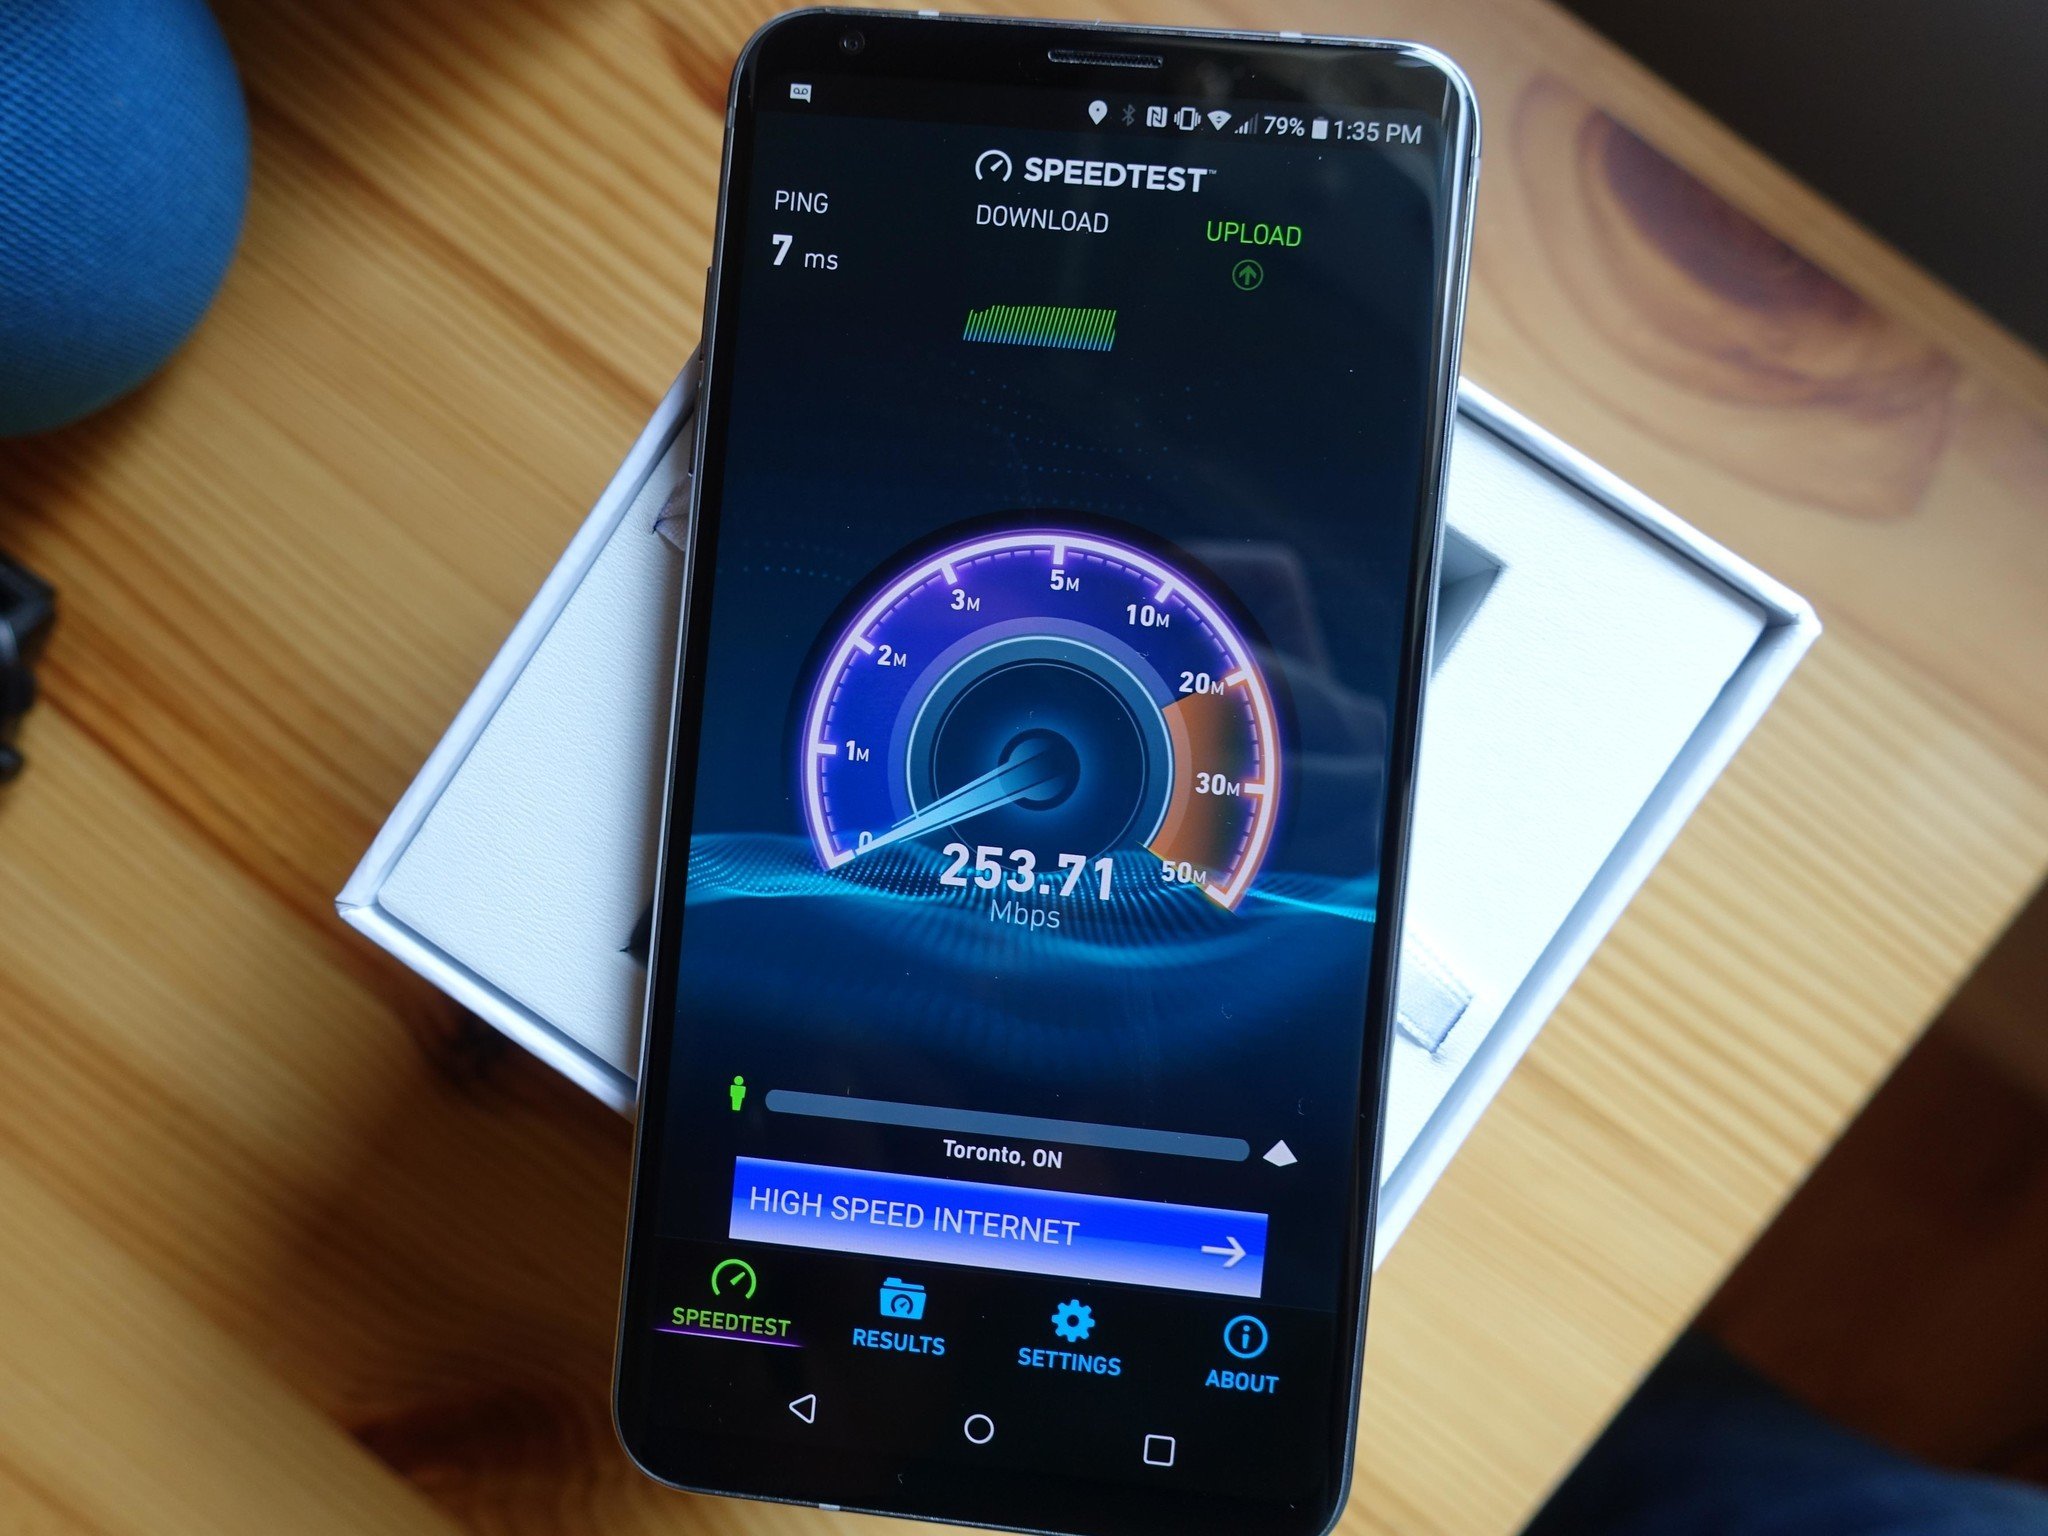 https://www.androidcentral.com/sites/androidcentral.com/files/styles/large_wm_brw/public/article_images/2017/08/lg-v30-speedtest-1.jpg?itok=-23X1MZA